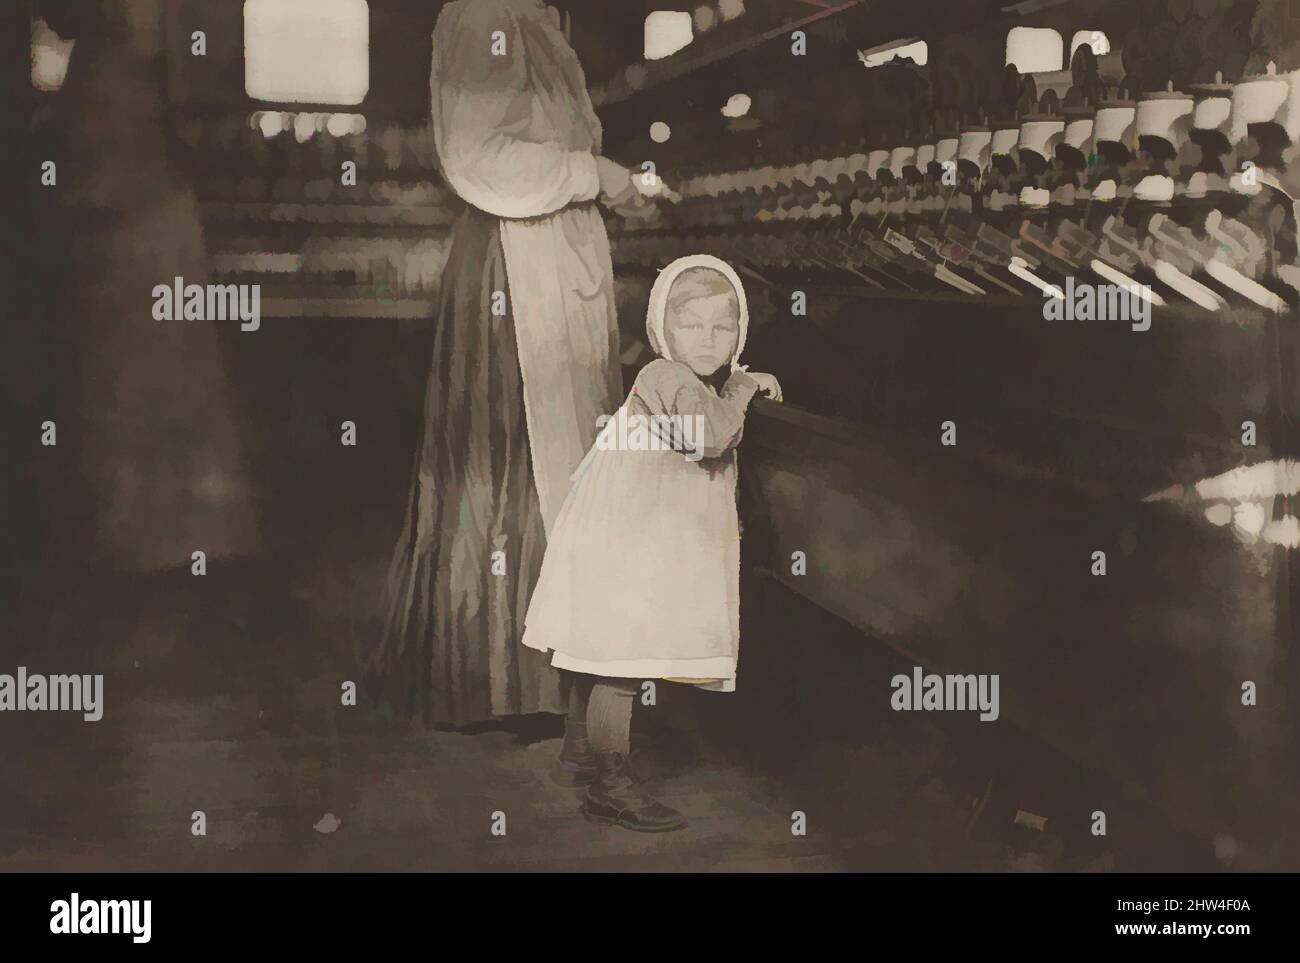 Art inspired by Ivey Mill, Hickory, N.C. Little one, 3 years old, who visits and plays in the mill. Daughter of the overseer., November 1898, Gelatin silver print, Image: 11.7 x 16.9 cm (4 5/8 x 6 5/8 in.), Photographs, Lewis Hine (American, 1874–1940), Trained as a sociologist at, Classic works modernized by Artotop with a splash of modernity. Shapes, color and value, eye-catching visual impact on art. Emotions through freedom of artworks in a contemporary way. A timeless message pursuing a wildly creative new direction. Artists turning to the digital medium and creating the Artotop NFT Stock Photo